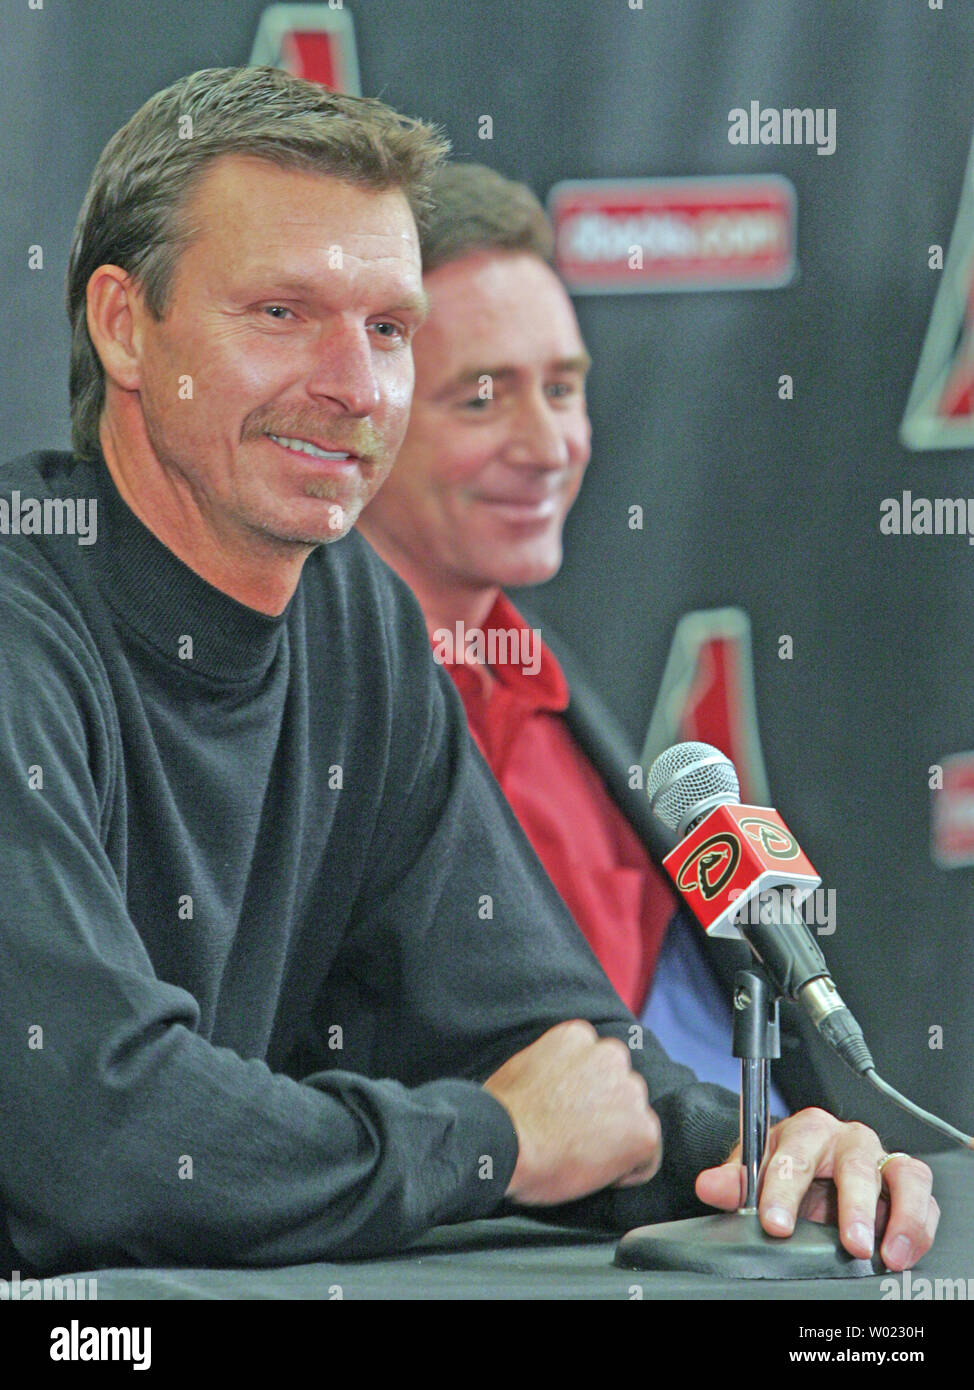 Newly signed pitcher Randy Johnson (L) sits next to Arizona Diaondbacks manager Bob Melvin at press conference at Chase Field in Phoenix, Arizona on January 9, 2007.   Johnson was traded to the Diamondbacks after a two-year stint with the New York Yankees. (UPI Photo/Gary C. Caskey) Stock Photo